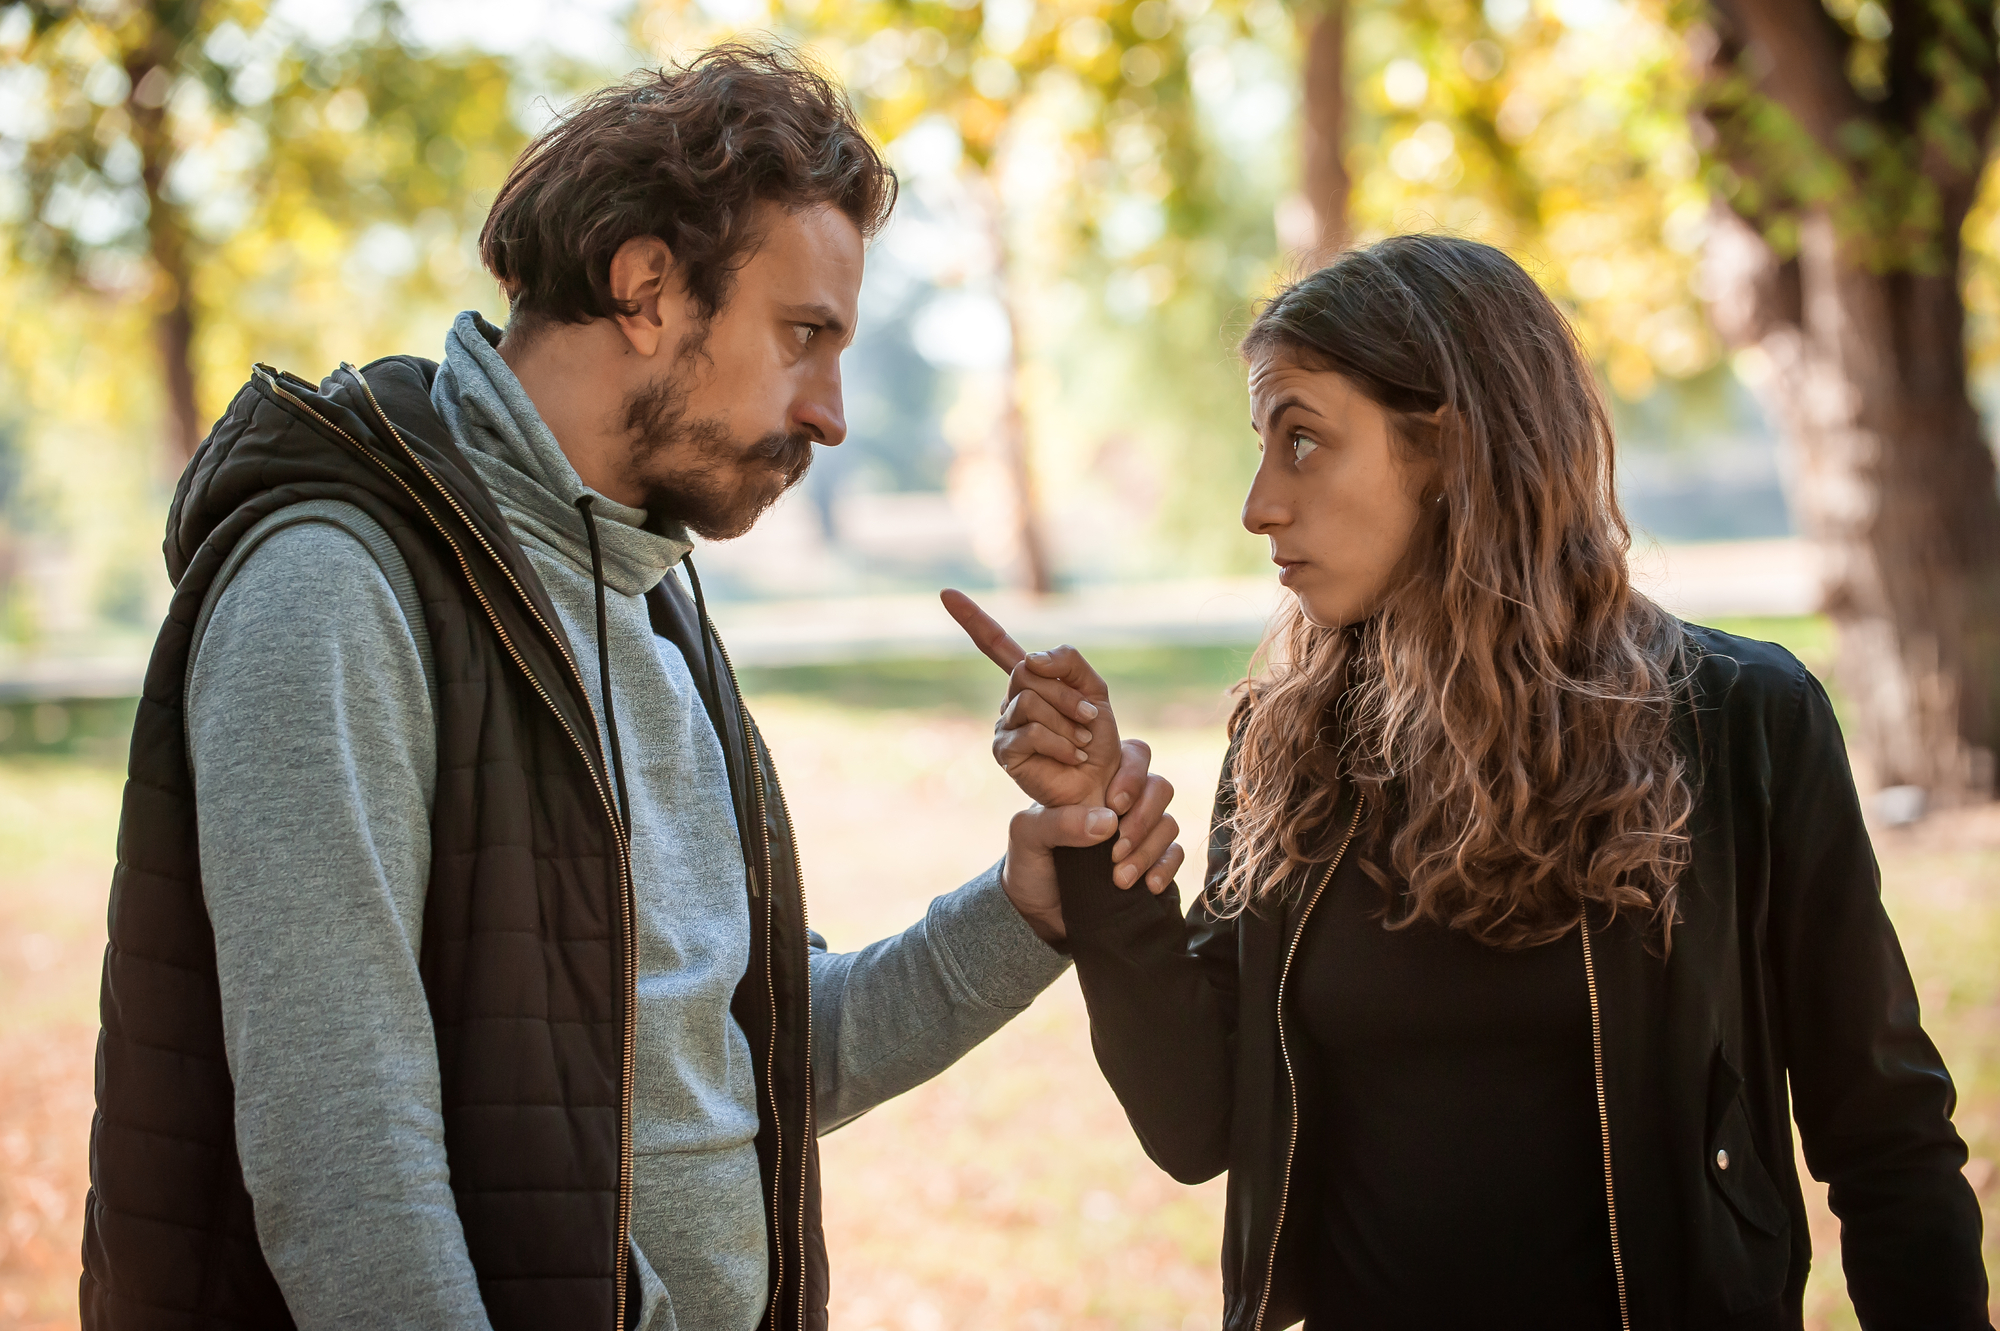 A man and a woman are outdoors in a park, engaged in a serious conversation. The woman, with long brown hair, is pointing her finger at the man while making an expressive face. The man, with short curly hair, is holding her wrist, looking at her intently.